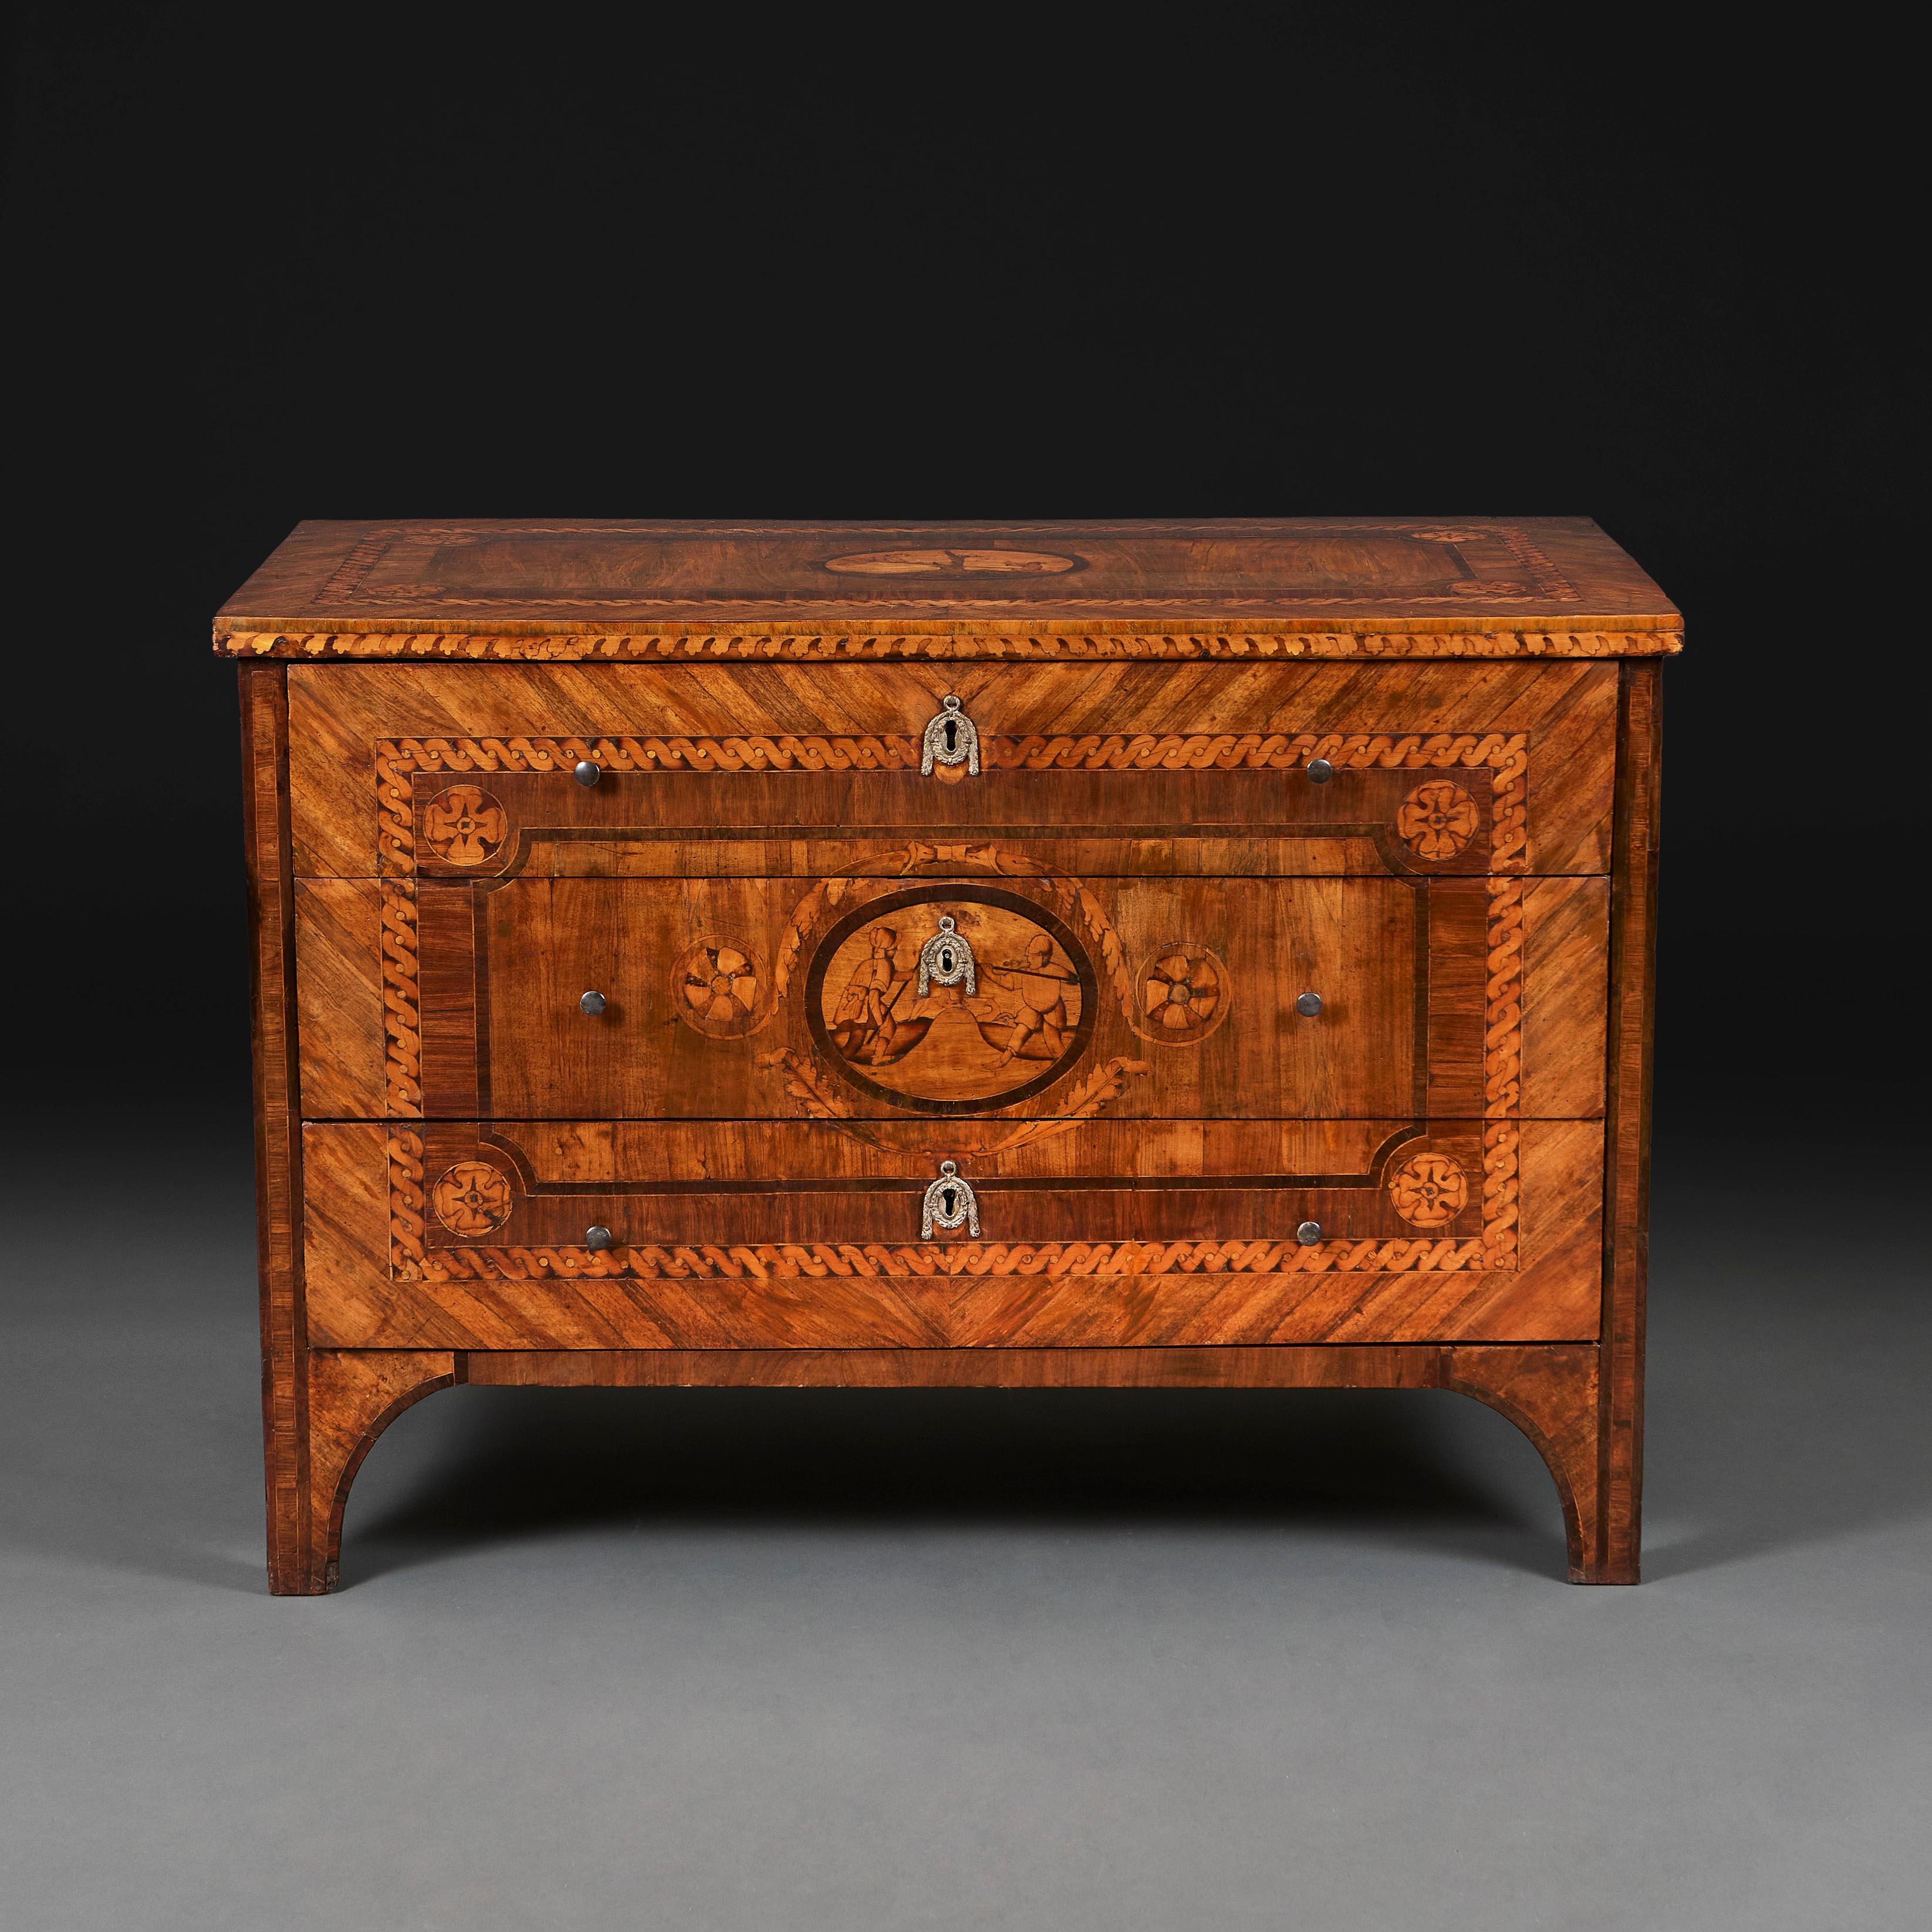 taly, circa 1790

A fine late eighteenth-century walnut marquetry commode inlaid with exotic timbers, rectangular guilloche motifs, the central draw with parquetry of figures in a naturalistic setting, all supported on raised bracket feet.

 Height